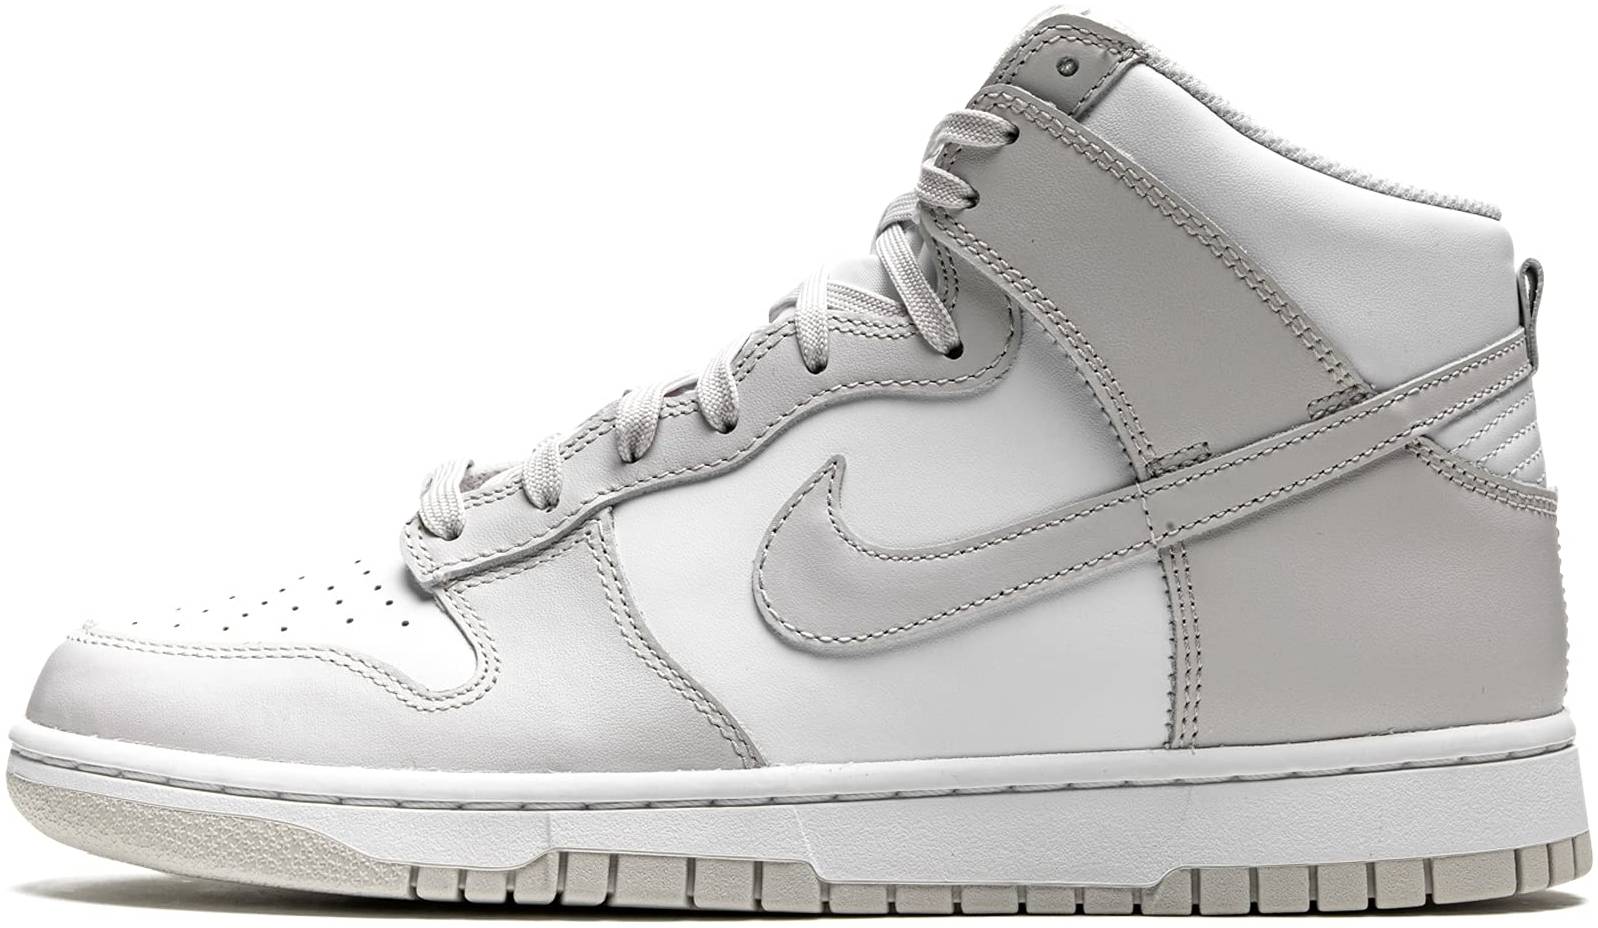 Nike Dunk High sneakers in white 